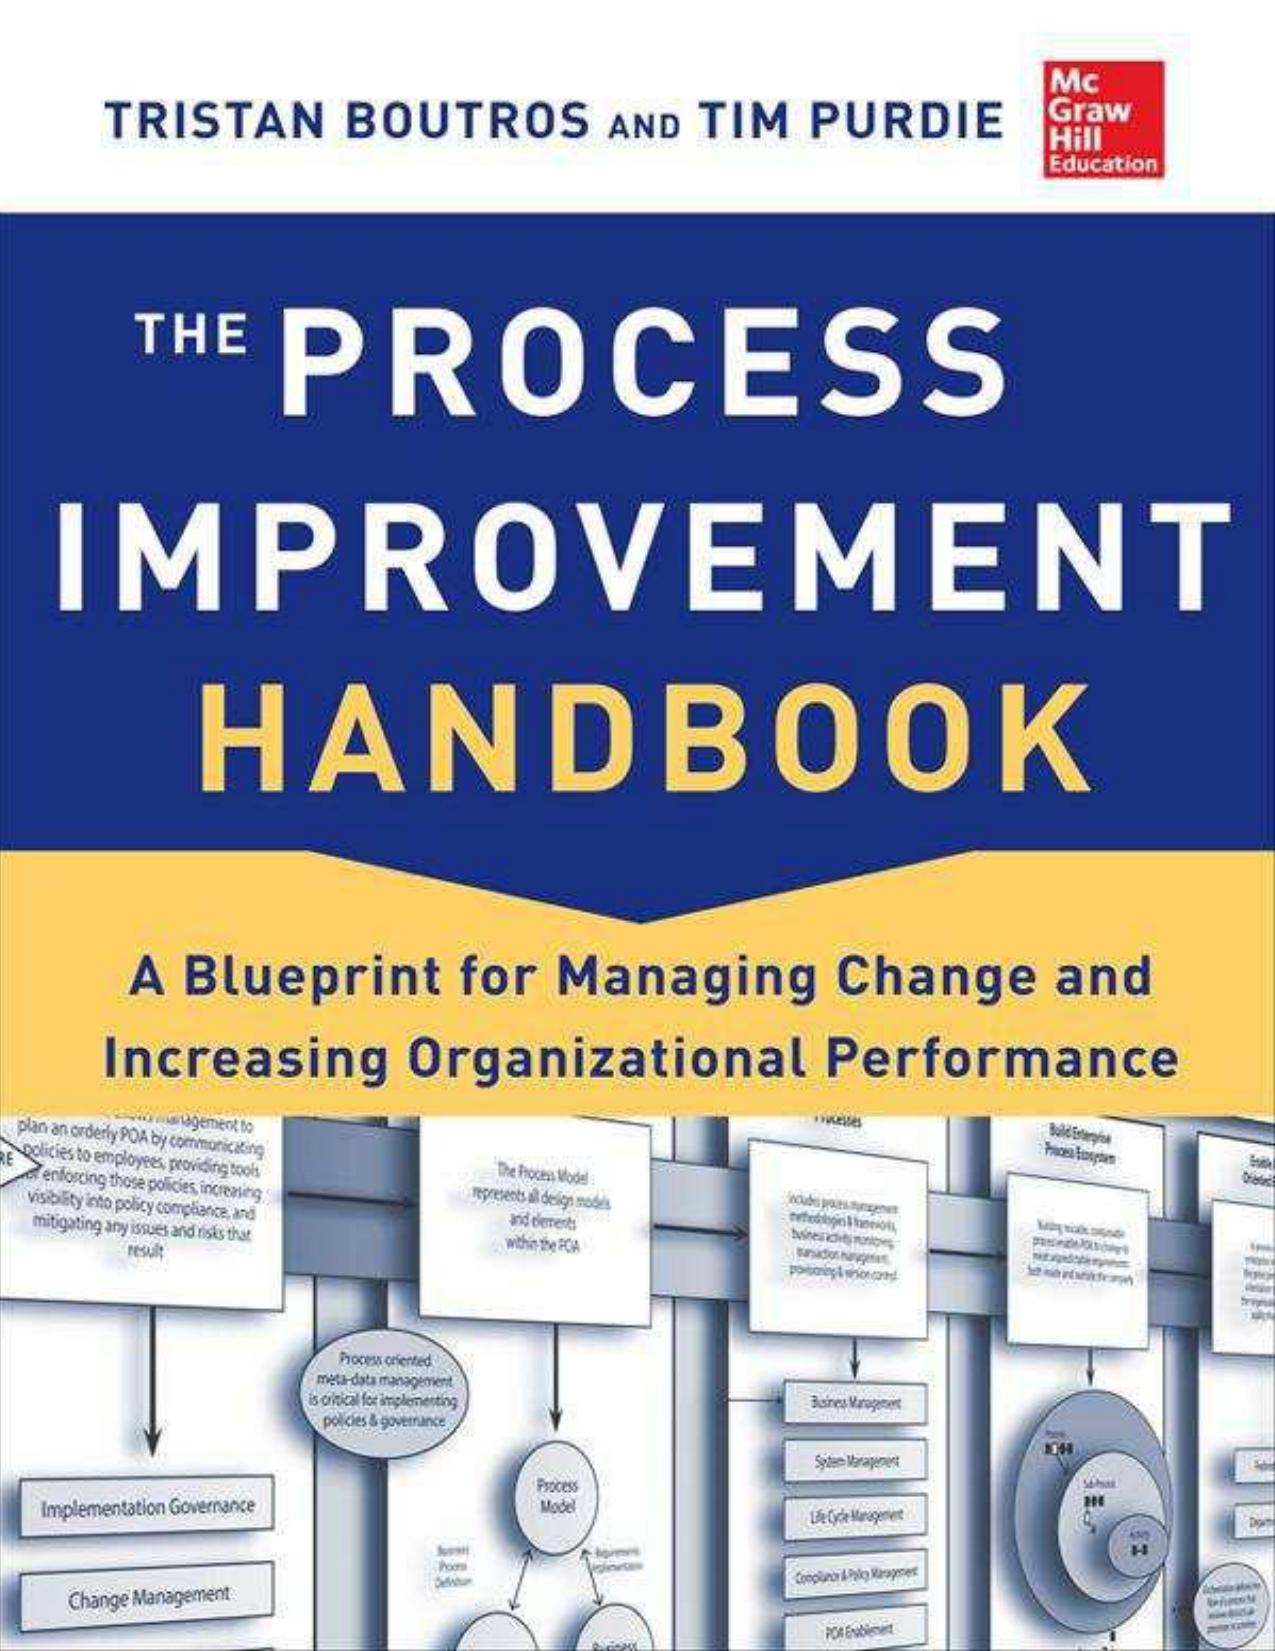 The Process Improvement Handbook: A Blueprint for Managing Change and Increasing Organizational Performance by Boutros Tristan & Purdie Tim